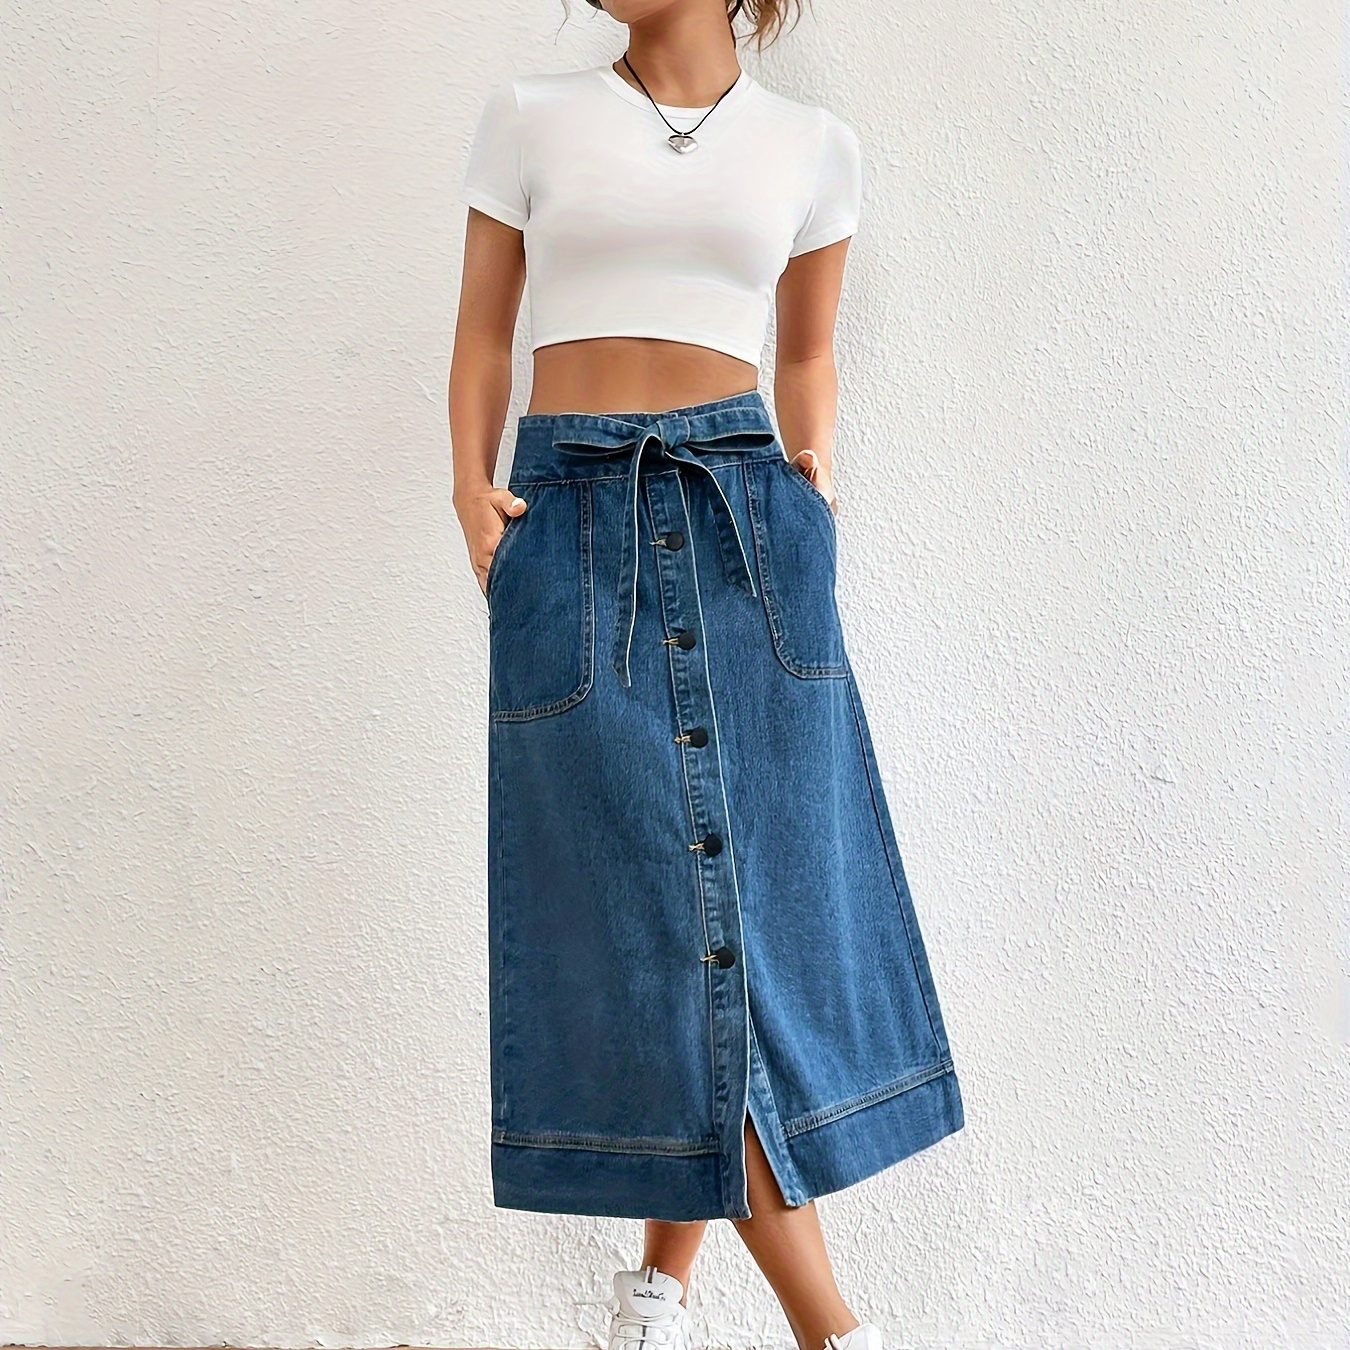 

Women's Plain Denim Skirt With Tie Belt, A-line Button Front Single-breasted, Casual Preppy Style, Jean Midi Skirt For Everyday Wear